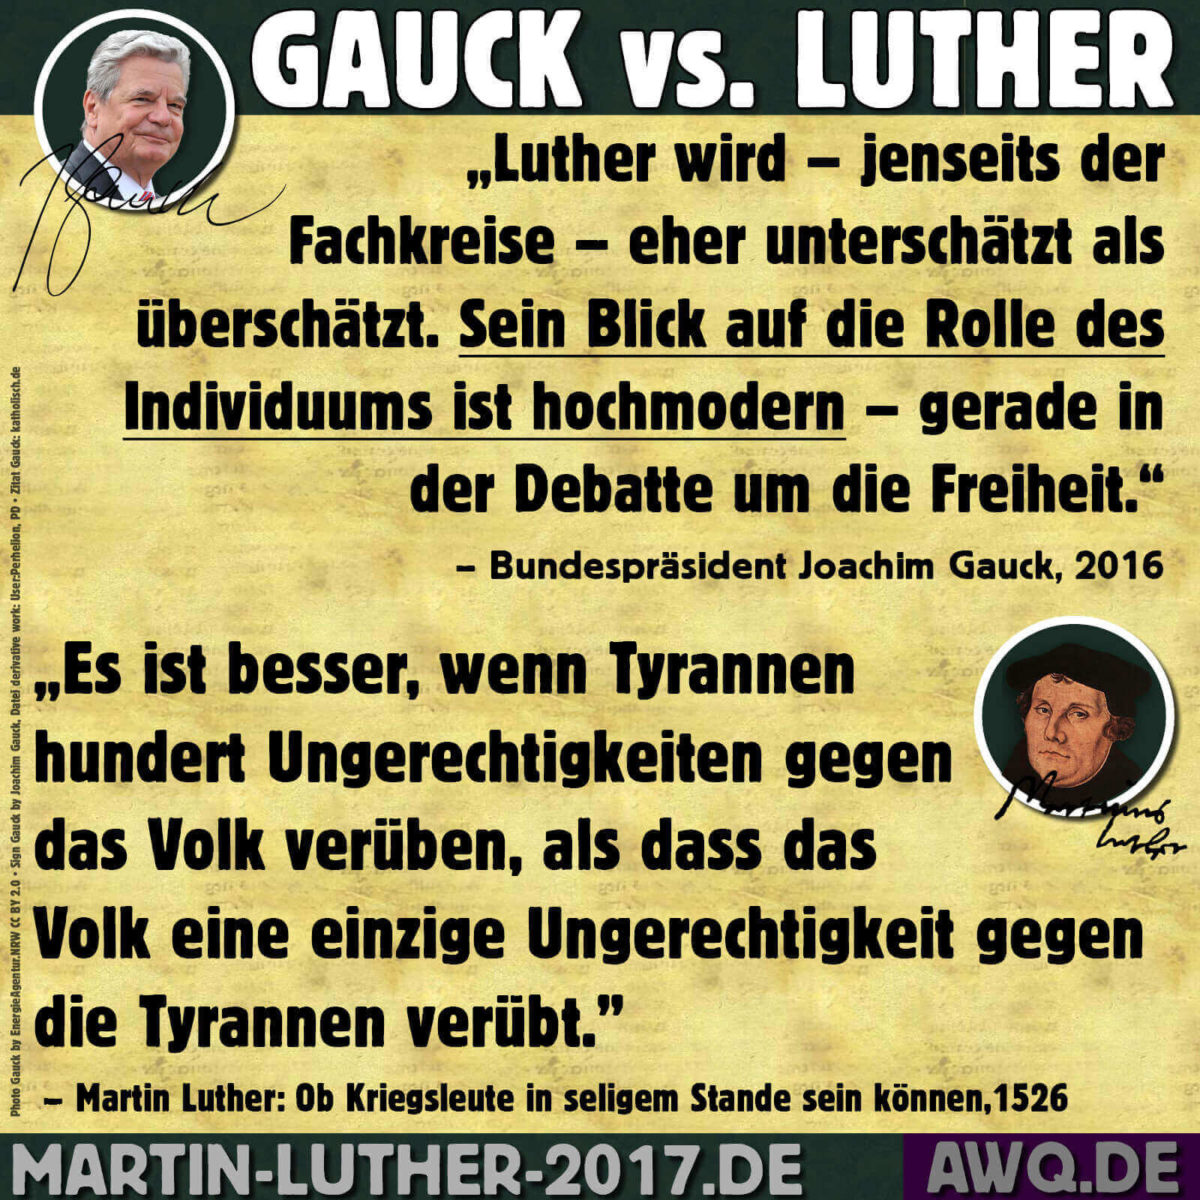 Gauck vs. Luther (2)